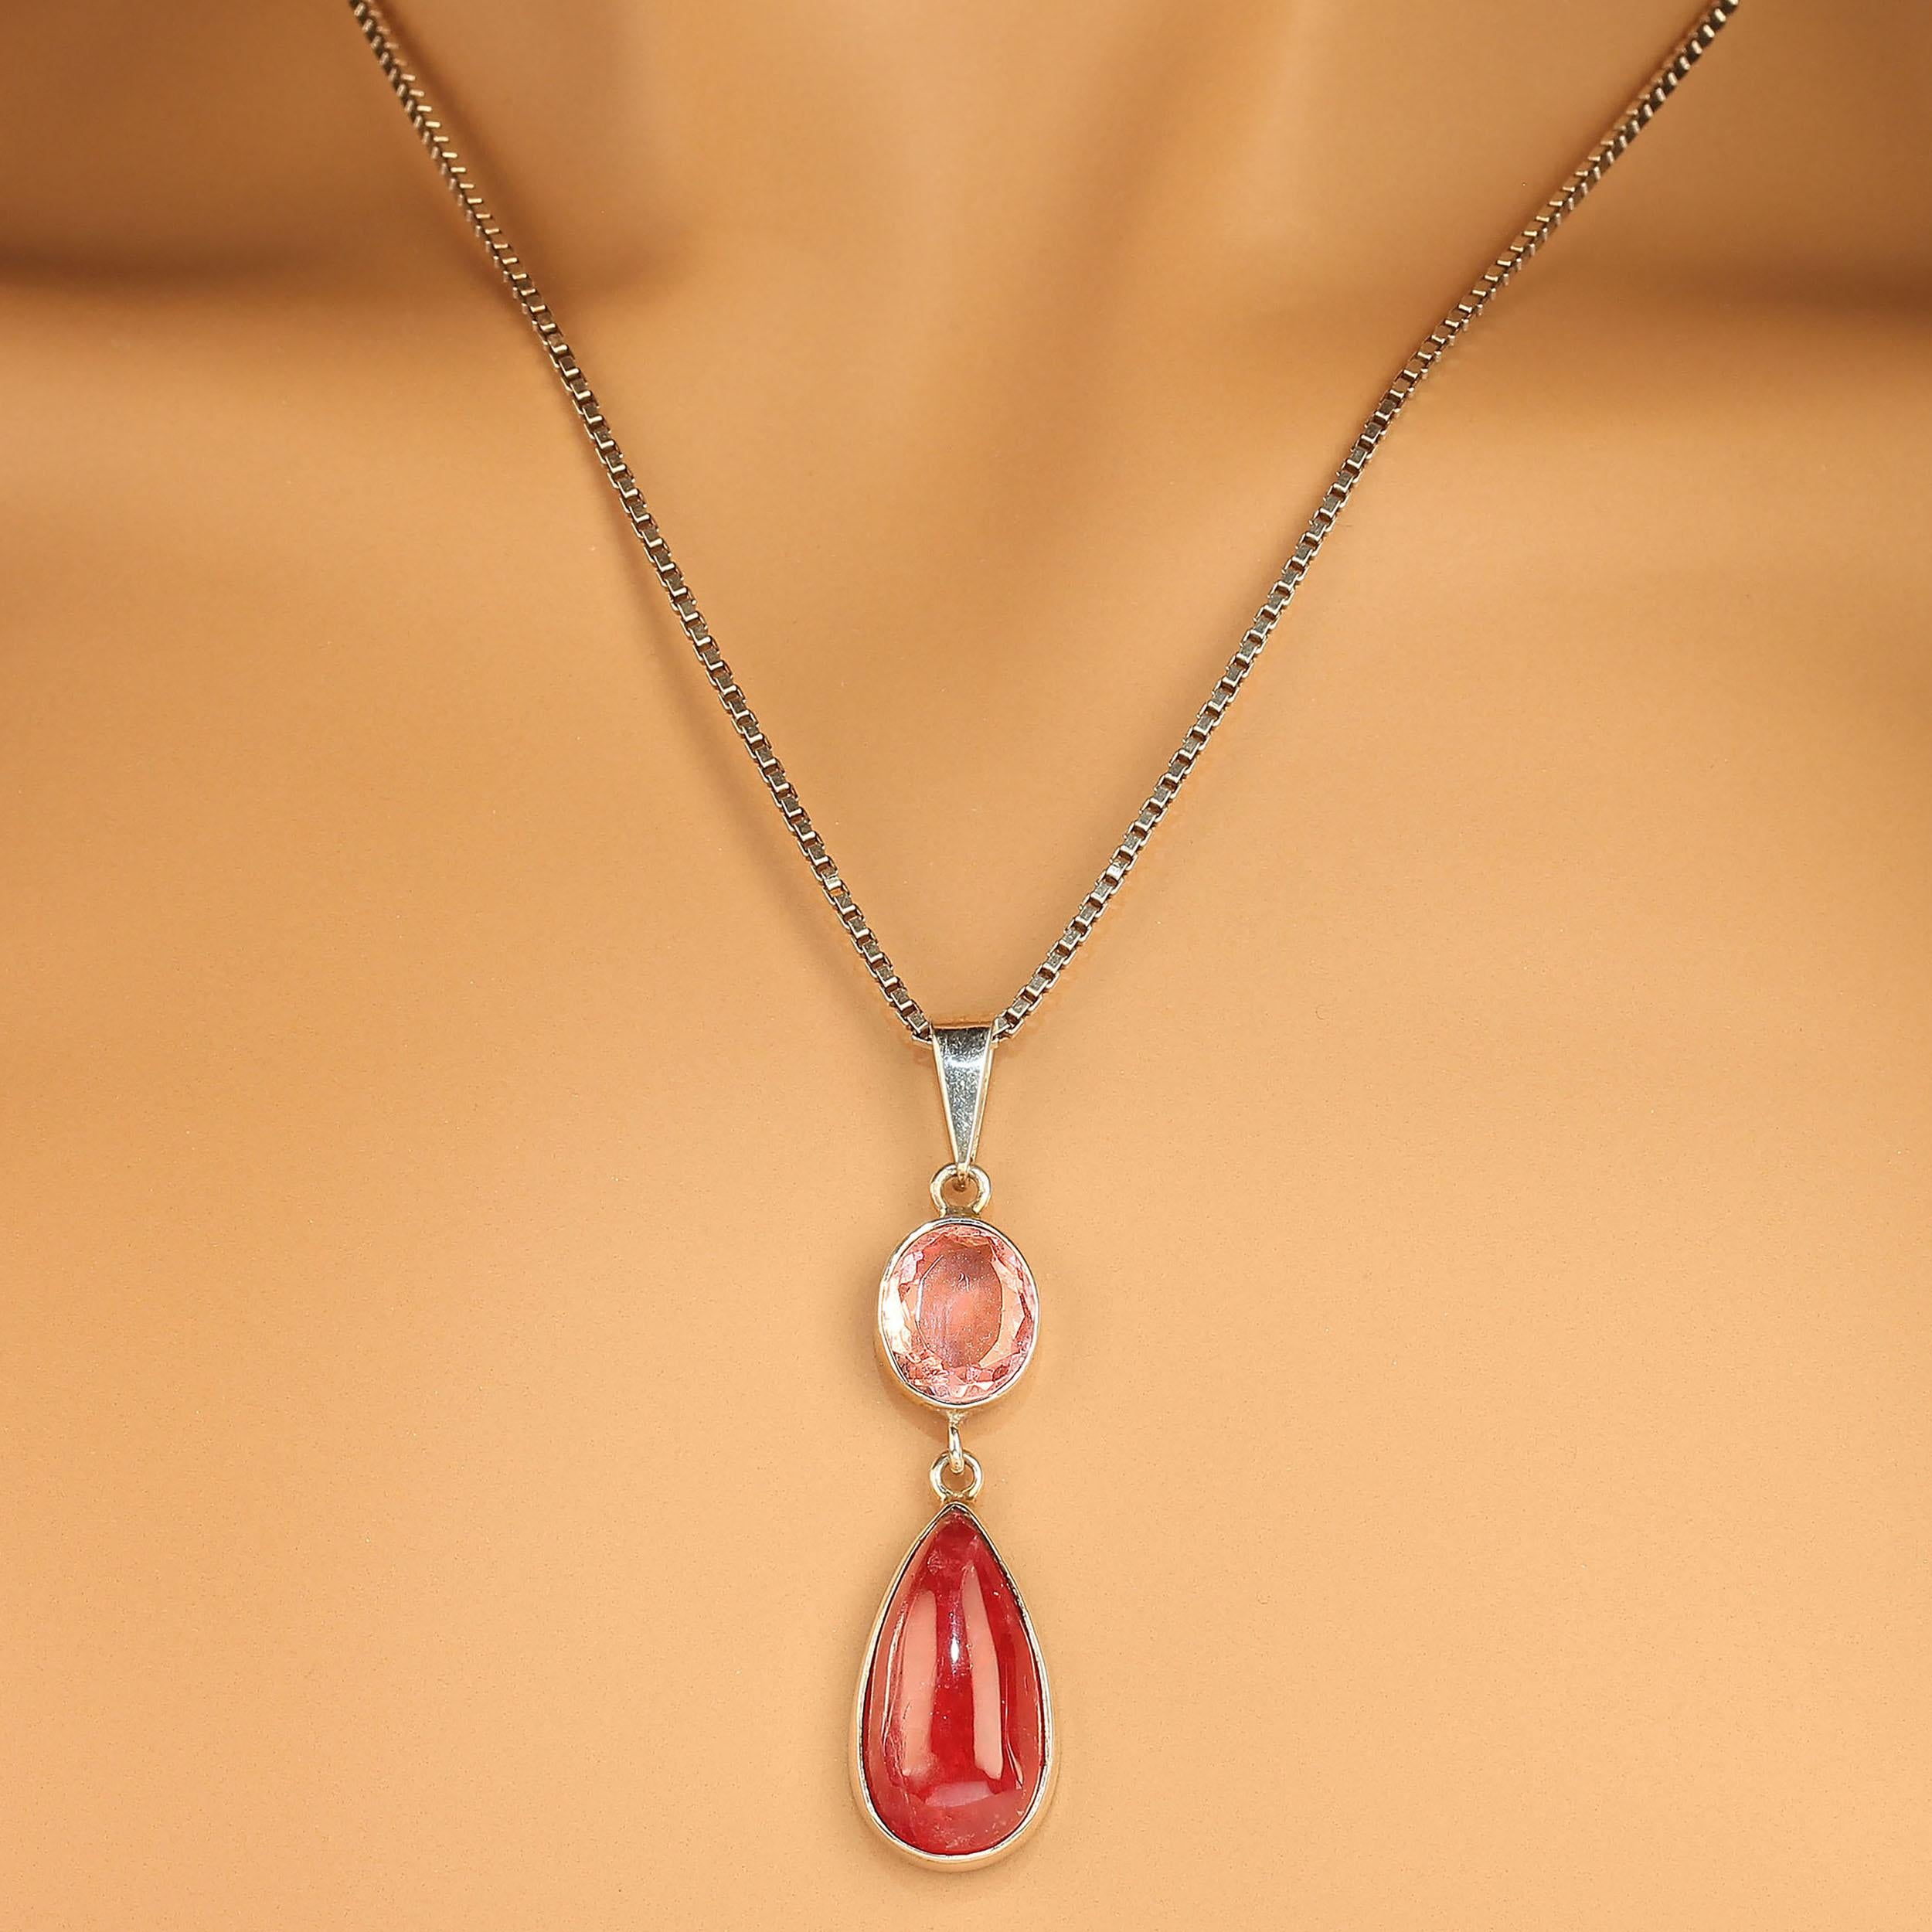 This unique two stone pendant features an oval pink tourmaline of 3.35 carats above a long teardrop shape deep pinky/red rhodonite of 13.64 carats. These two gemstones are hinged together and the total length of the pendant is 2 inches. It is